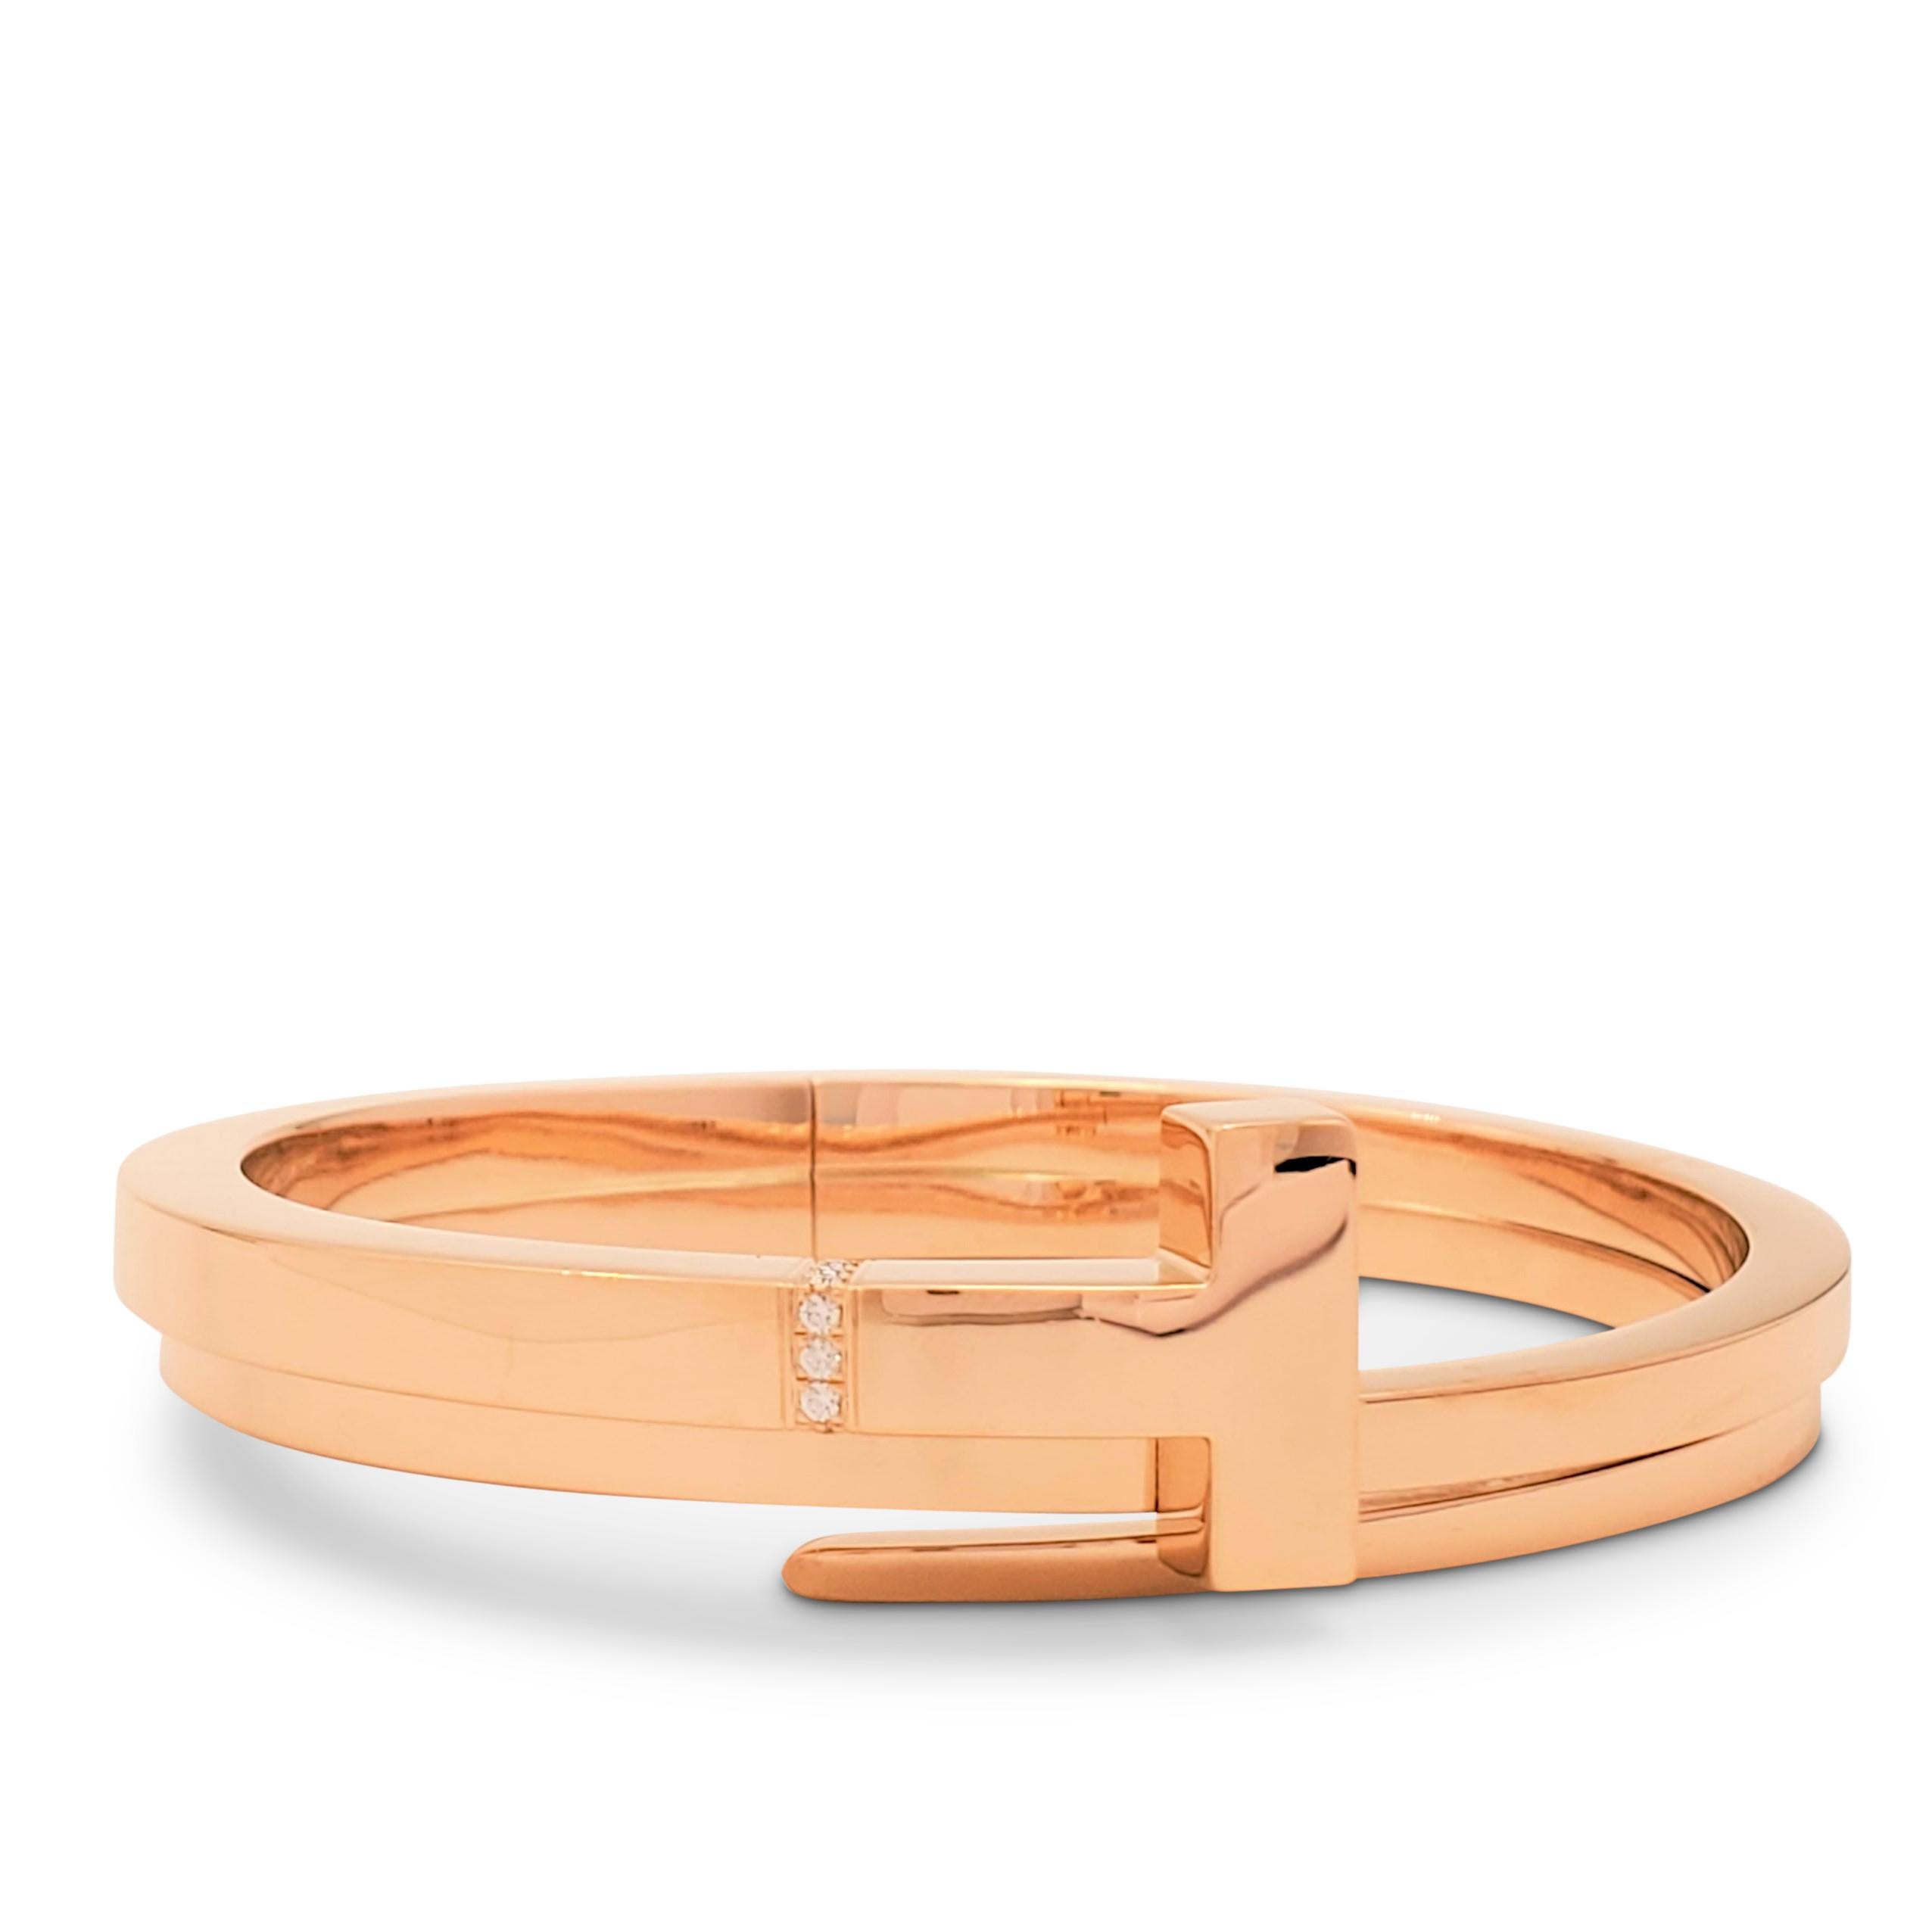 Authentic Tiffany & Co. 'Tiffany T' square wrap bracelet crafted in 18 karat rose gold and accented with an estimated 0.05 carats of high quality (E-F color, VS clarity) round brilliant cut diamonds. Signed T&Co., Au750. The bracelet is not